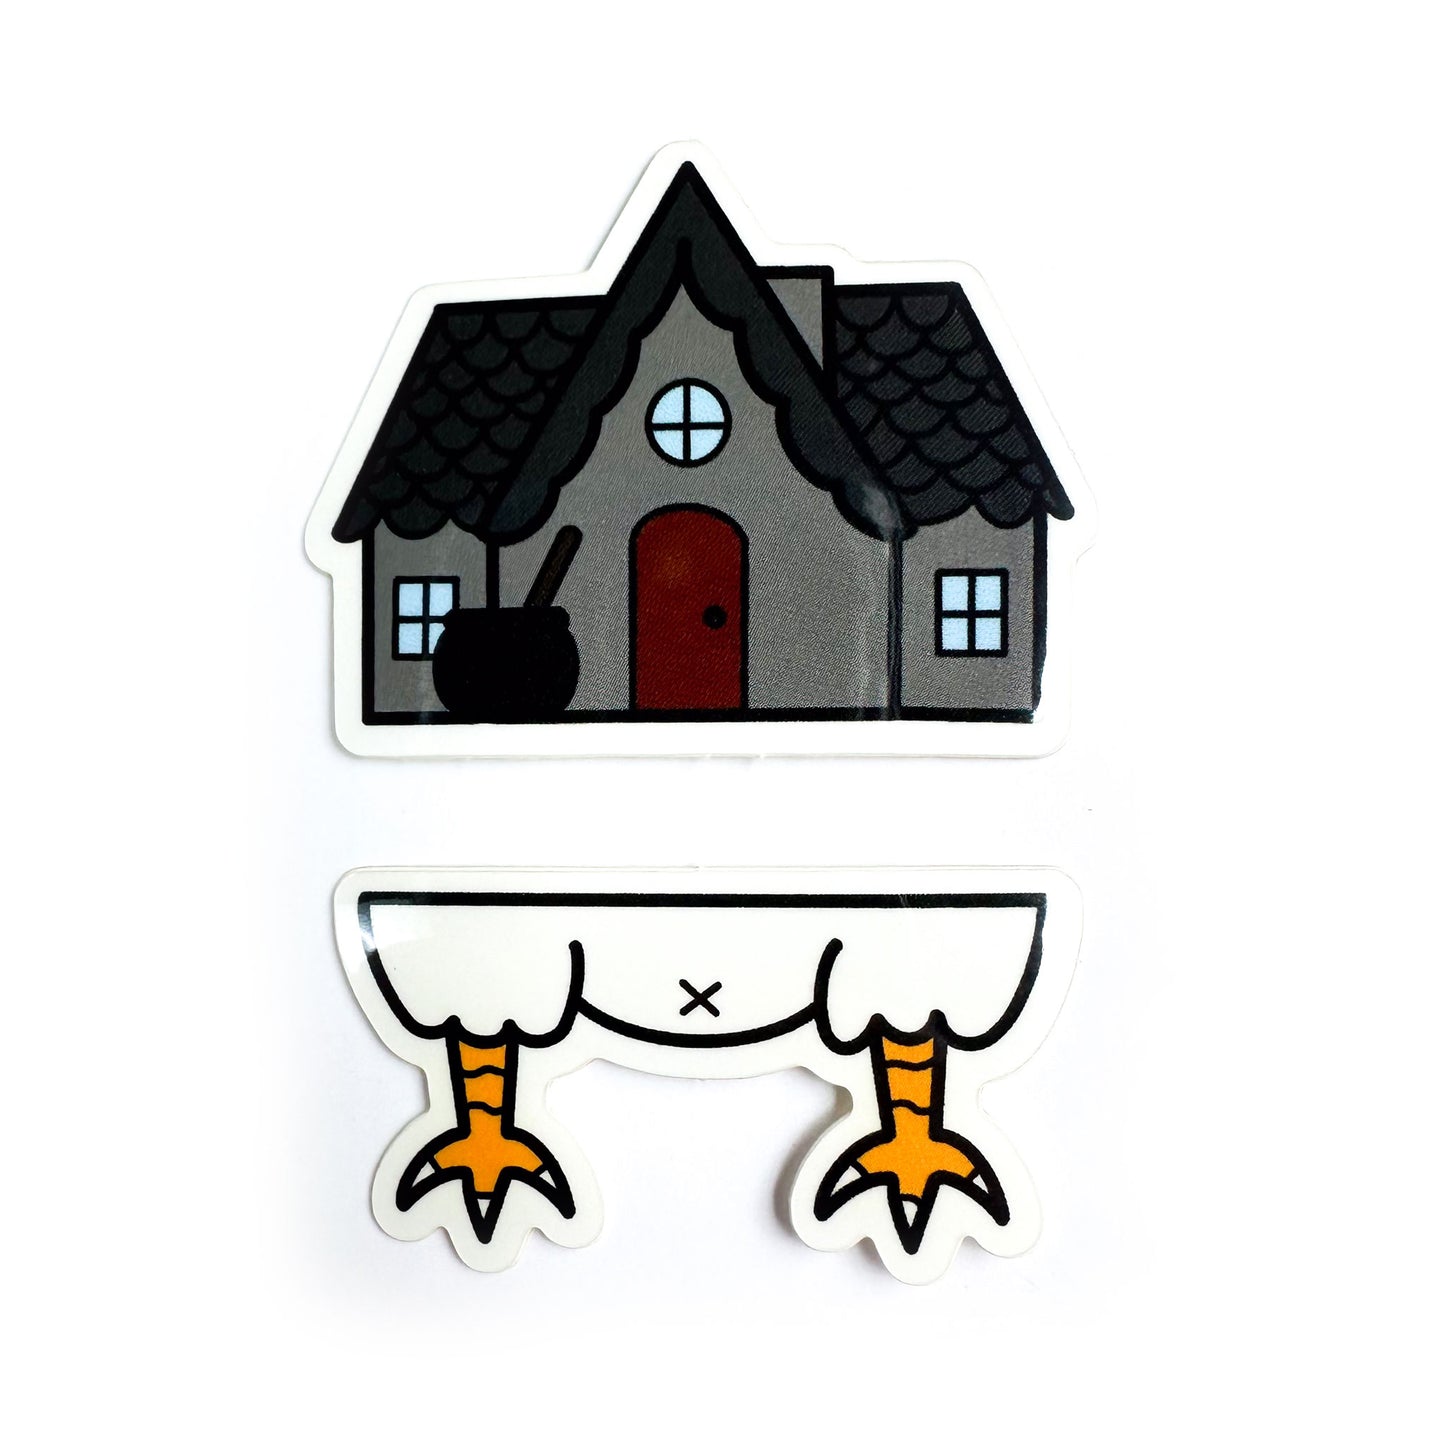 Two vinyl stickers that come together to form Baba Yaga's house. The top sticker is a grey house with a peaked roof and a cauldron outside. The bottom sticker is a chicken butt with legs. 